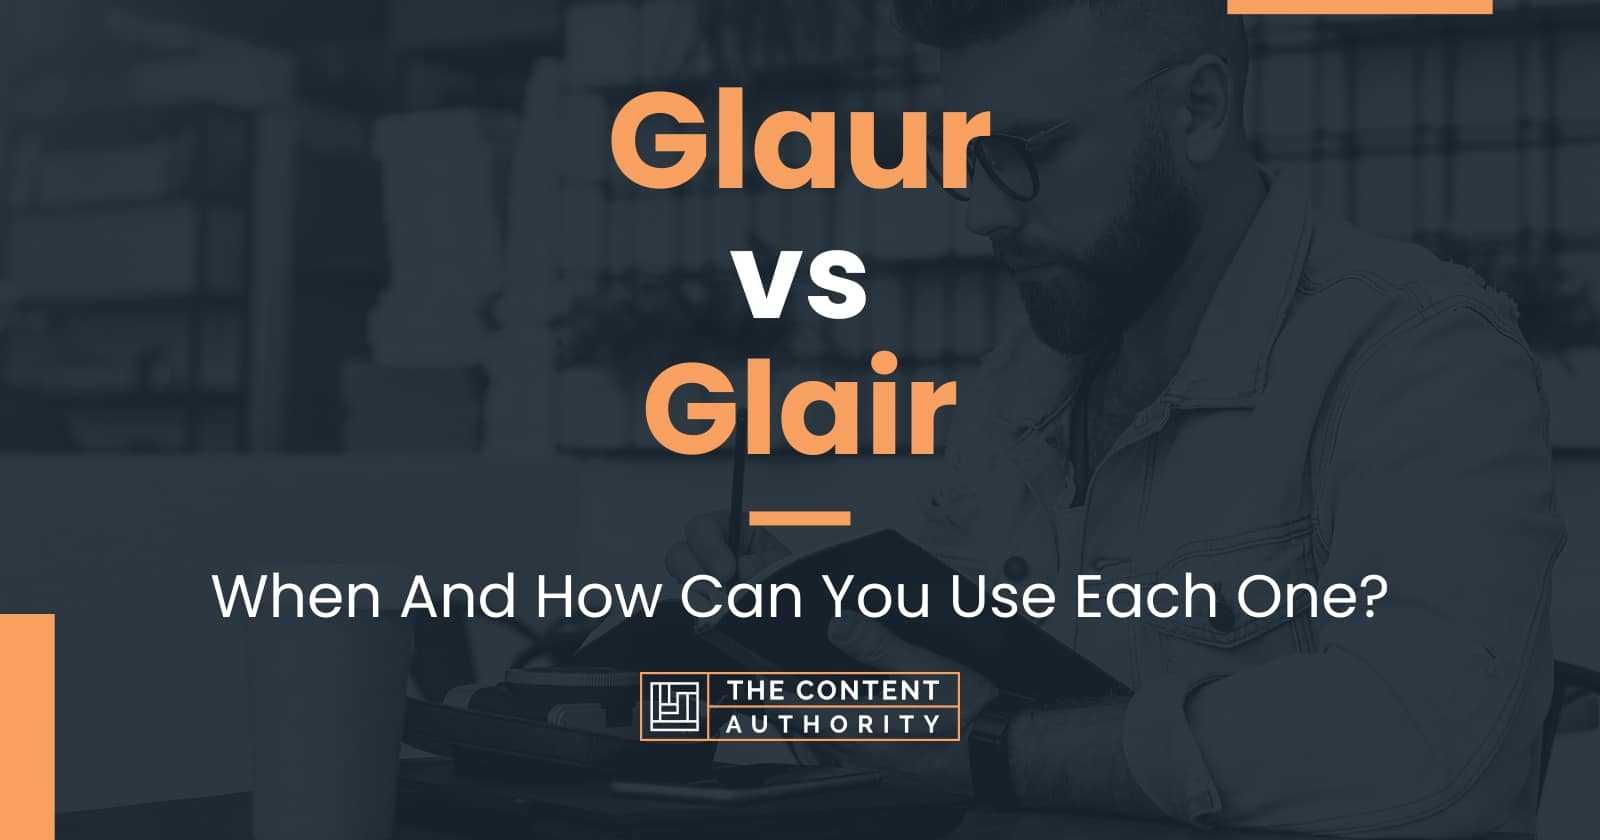 Glaur vs Glair: When And How Can You Use Each One?